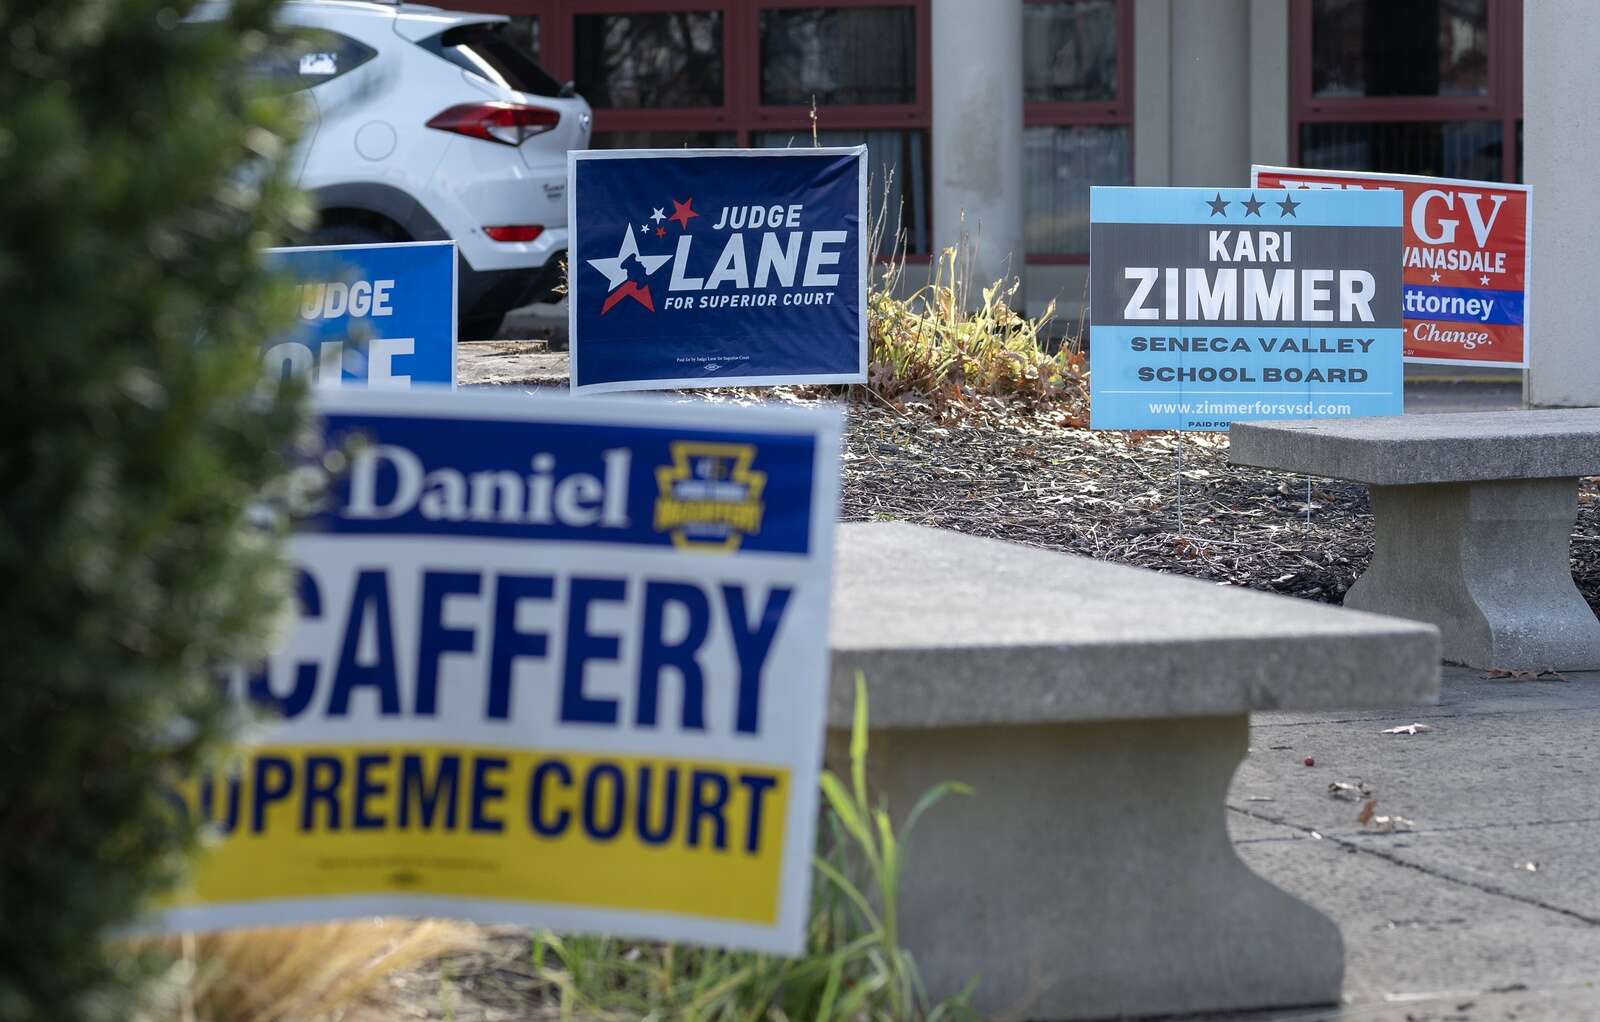 Signs are displayed at the entrance of the Cranberry Township Municipal Center